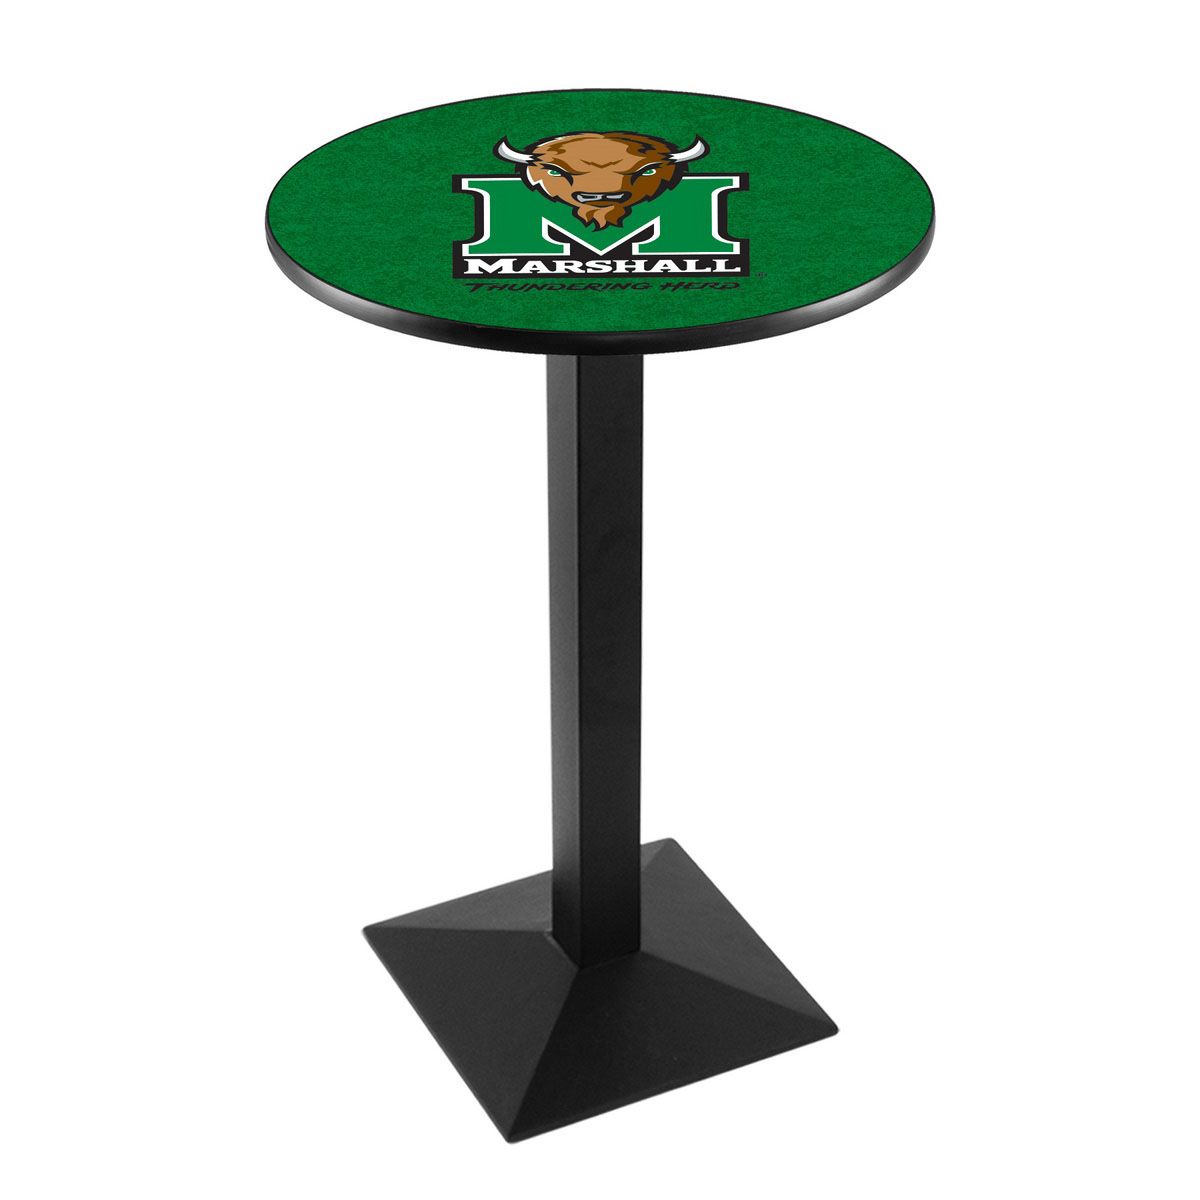 Marshall University Logo Pub Bar Table With Square Stand